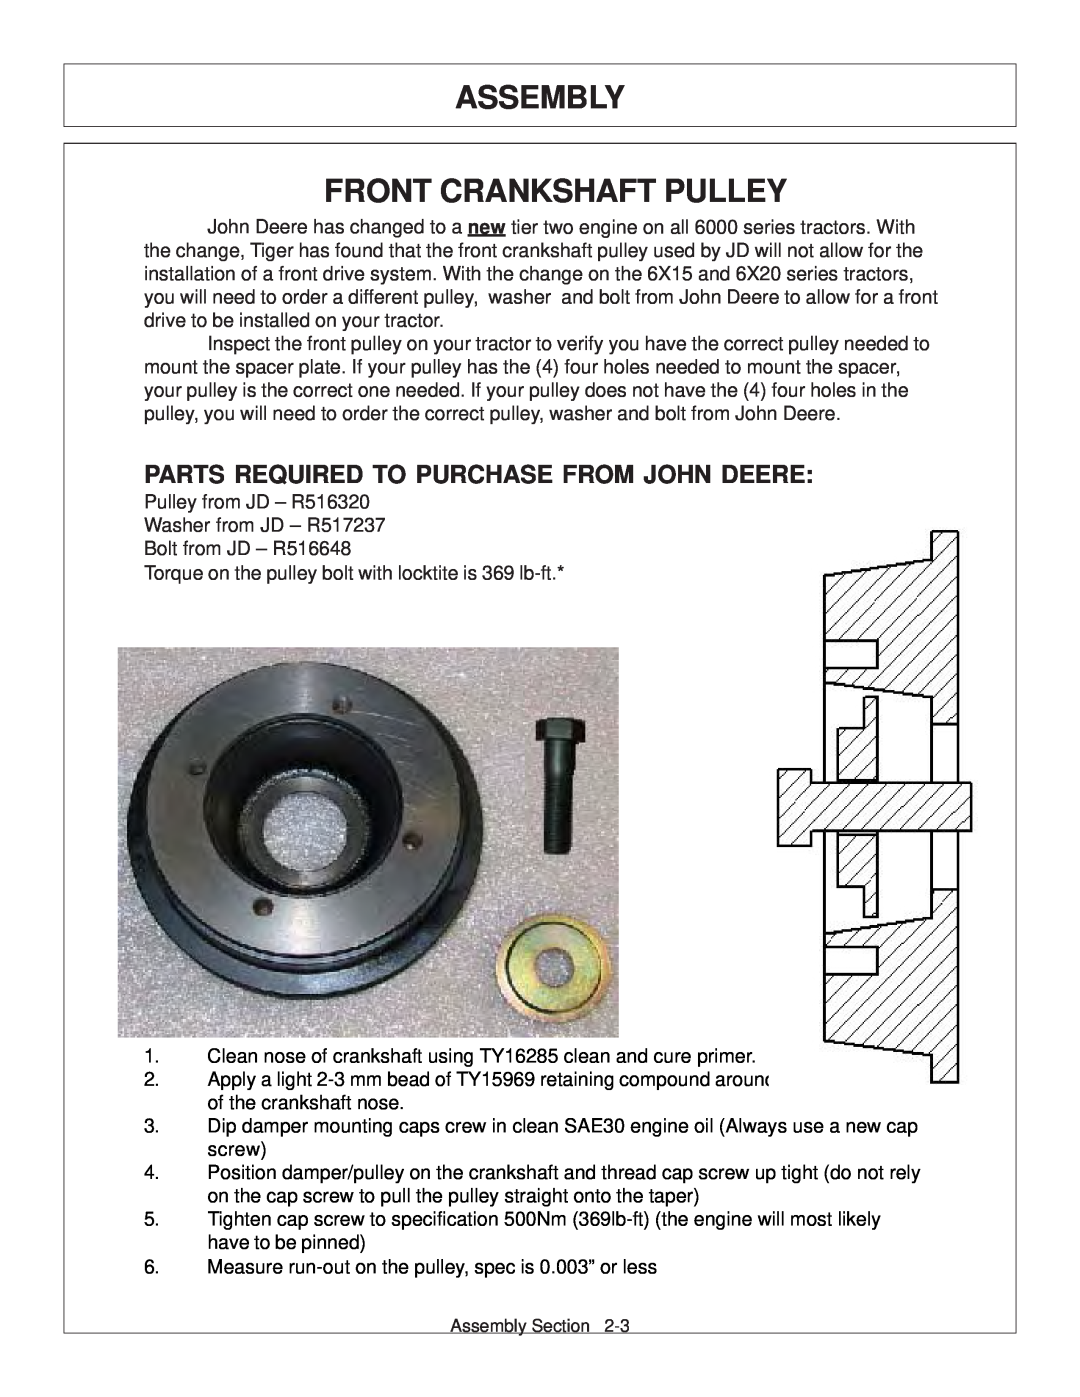 Tiger JD 62-6420 manual Assembly Front Crankshaft Pulley, Parts Required To Purchase From John Deere, Solution 